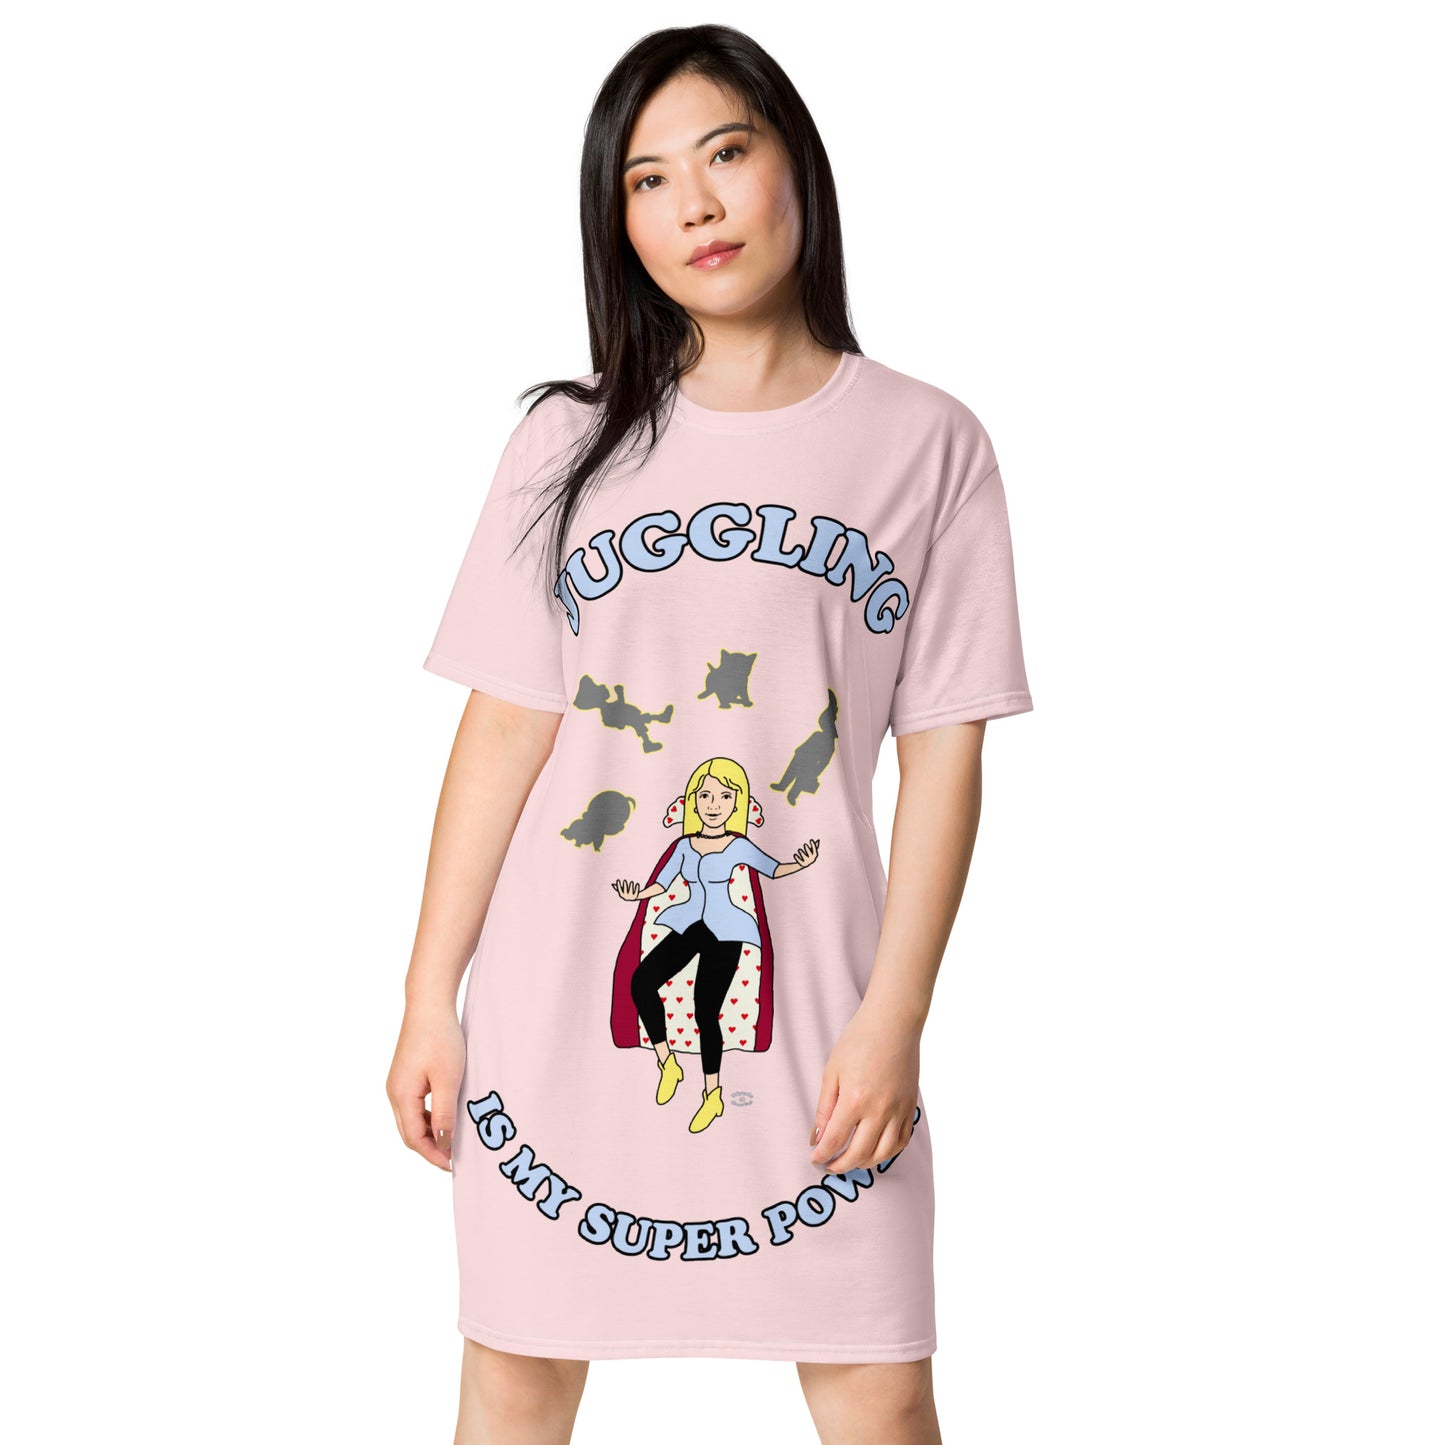 A women wearing a short sleeve tshirt dress which has on the front a cartoon women in a cape juggling her family like a jester and the text Juggling Is My Super Power - front - light pink